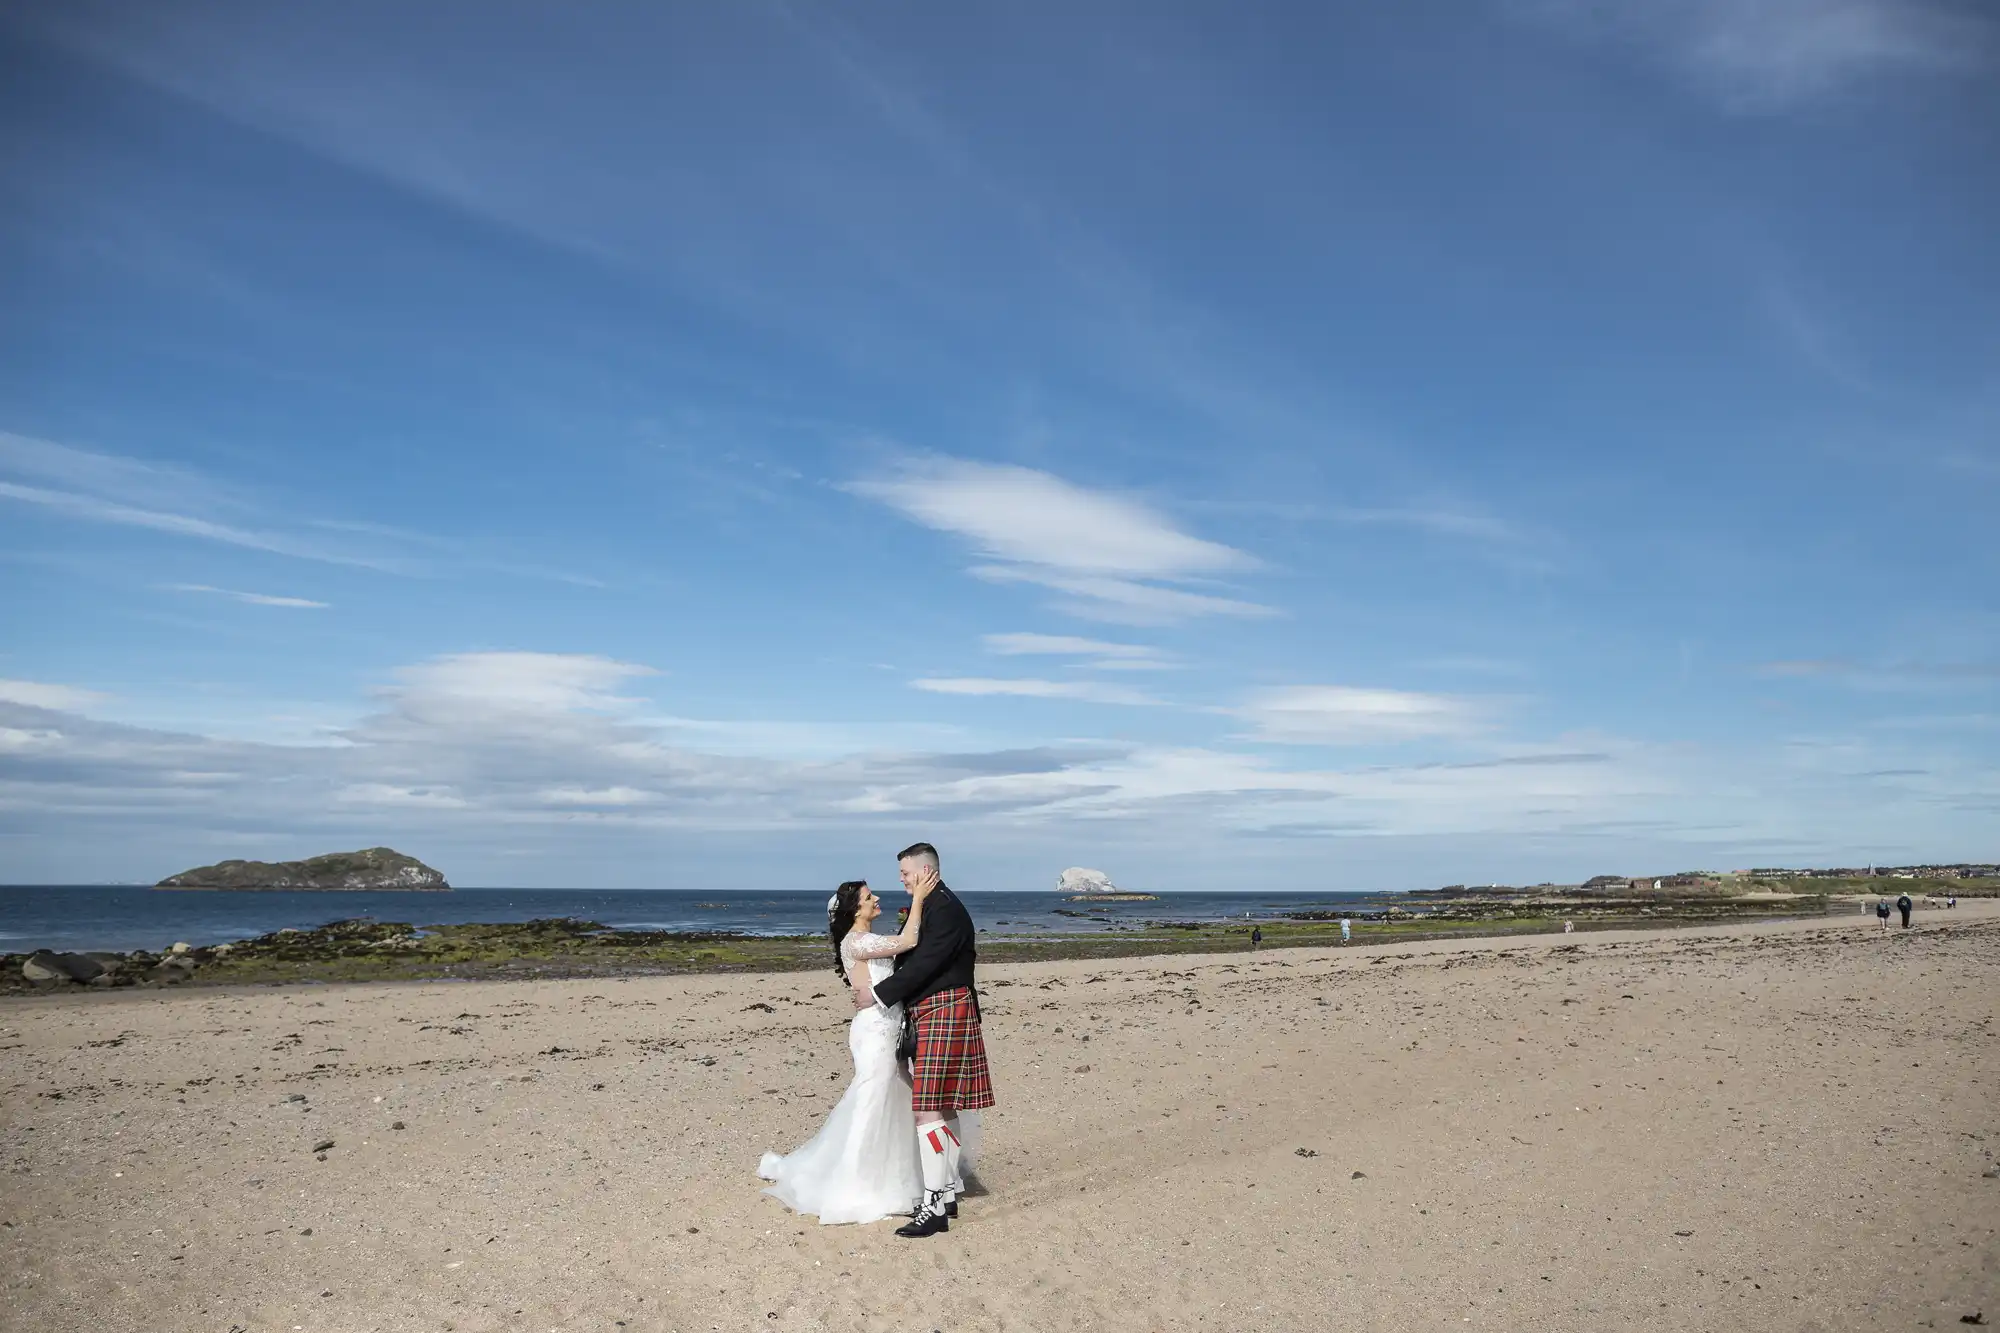 A couple in wedding attire, the man in a kilt, embracing on a sandy beach with distant islands under a clear sky.